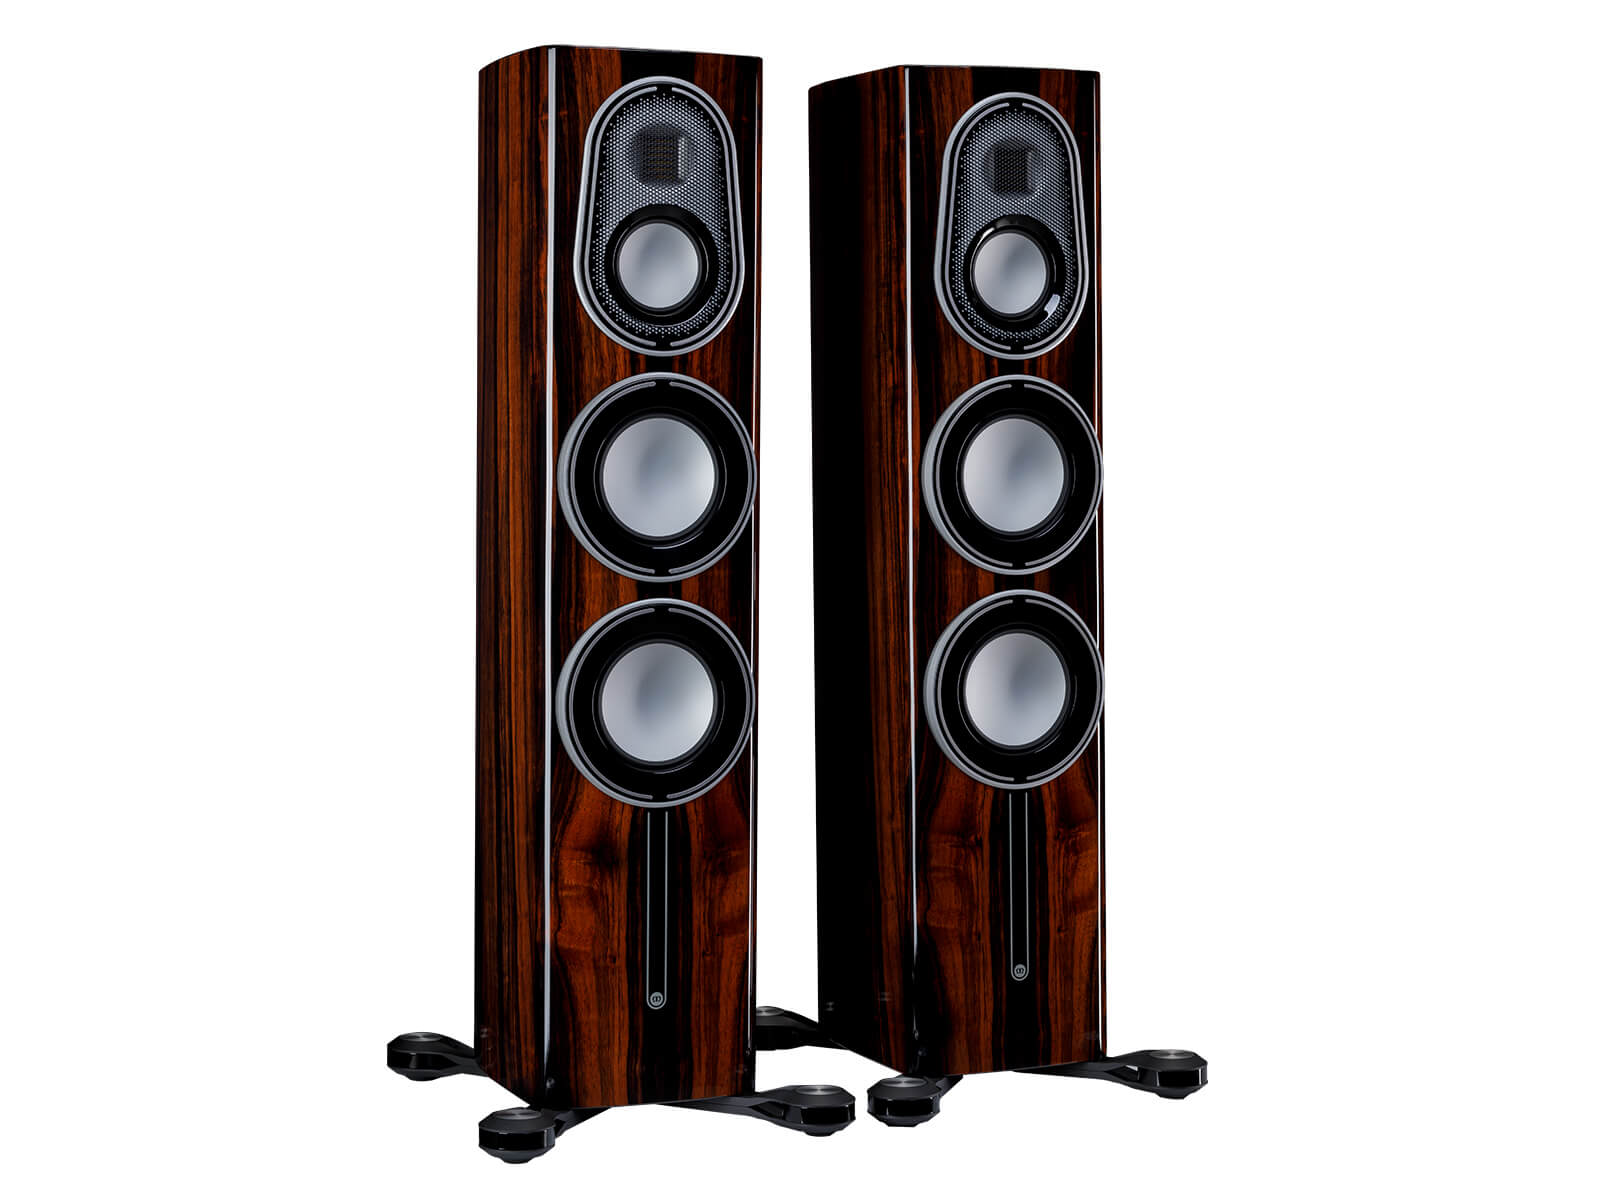 A pair of Monitor Audio Platinum 200 3G, in a Piano Ebony finish, iso view.